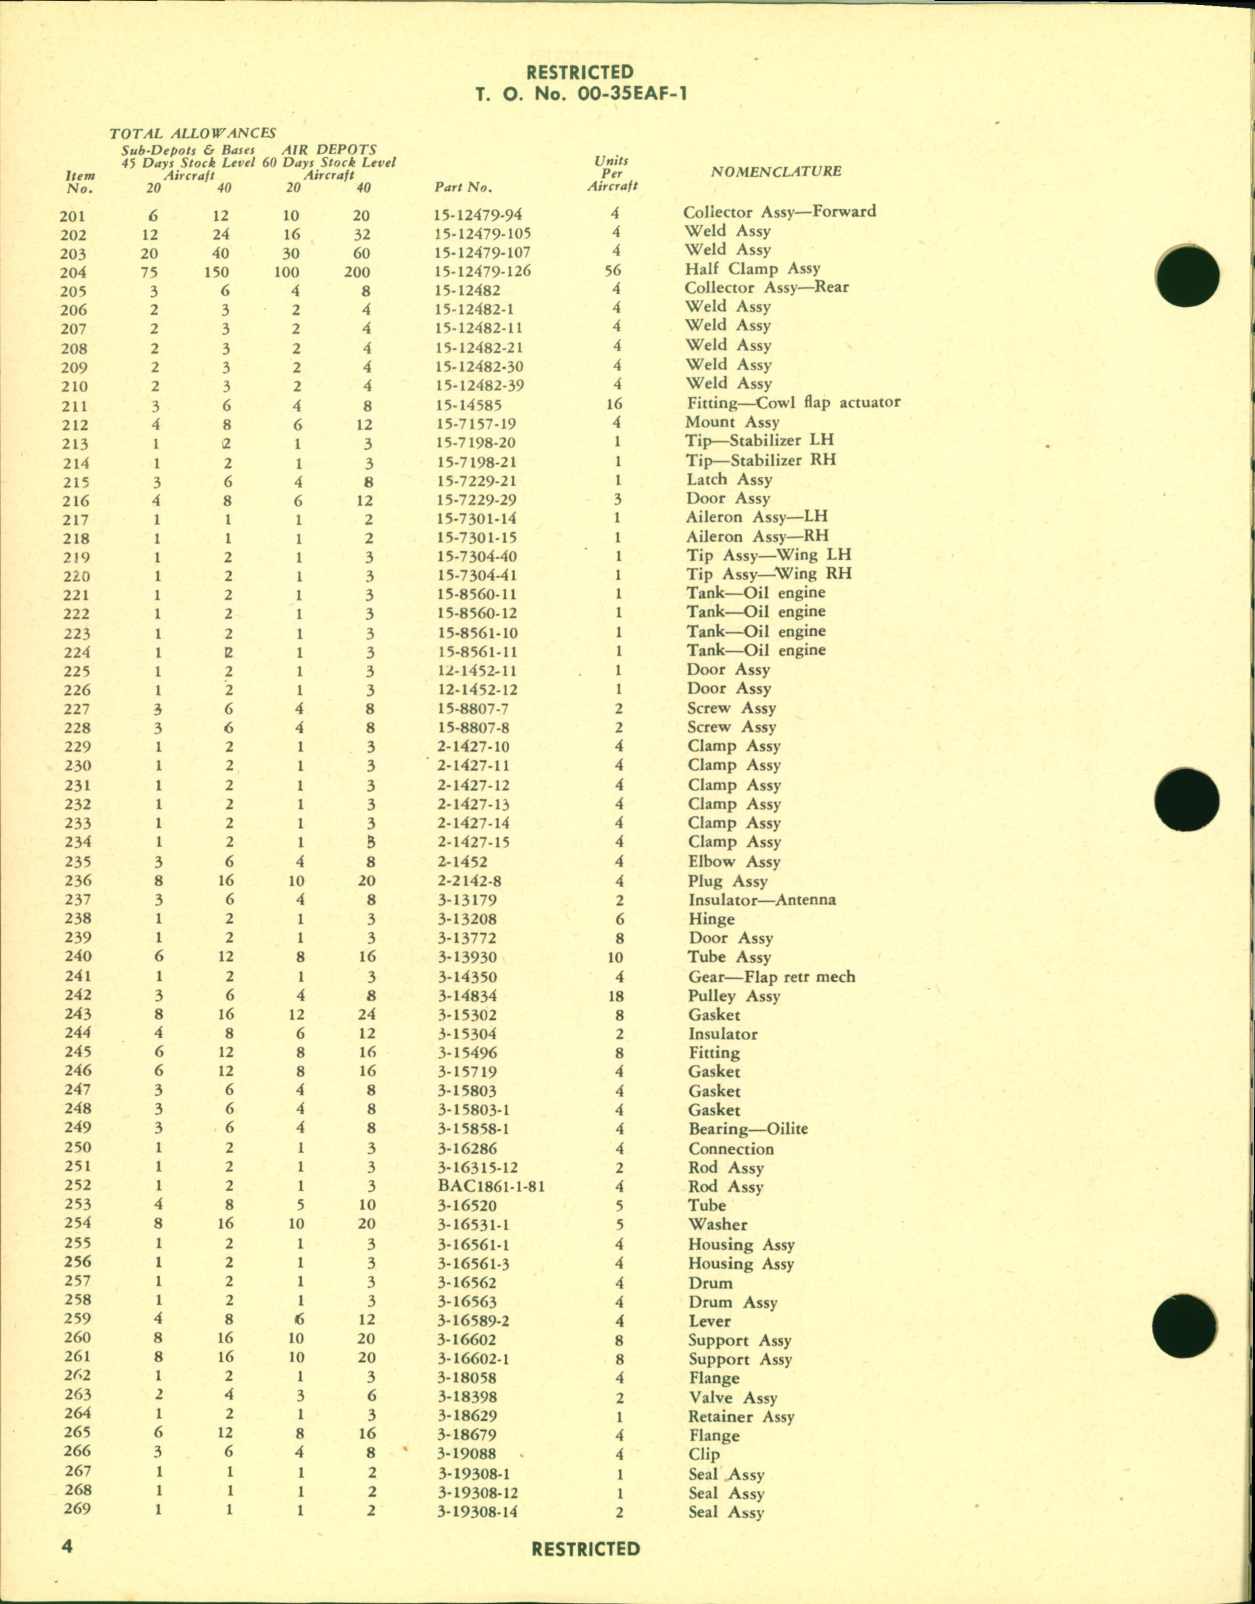 Sample page 6 from AirCorps Library document: Table of Credit - Airplane Maintenance Parts - for B-29 Aircraft